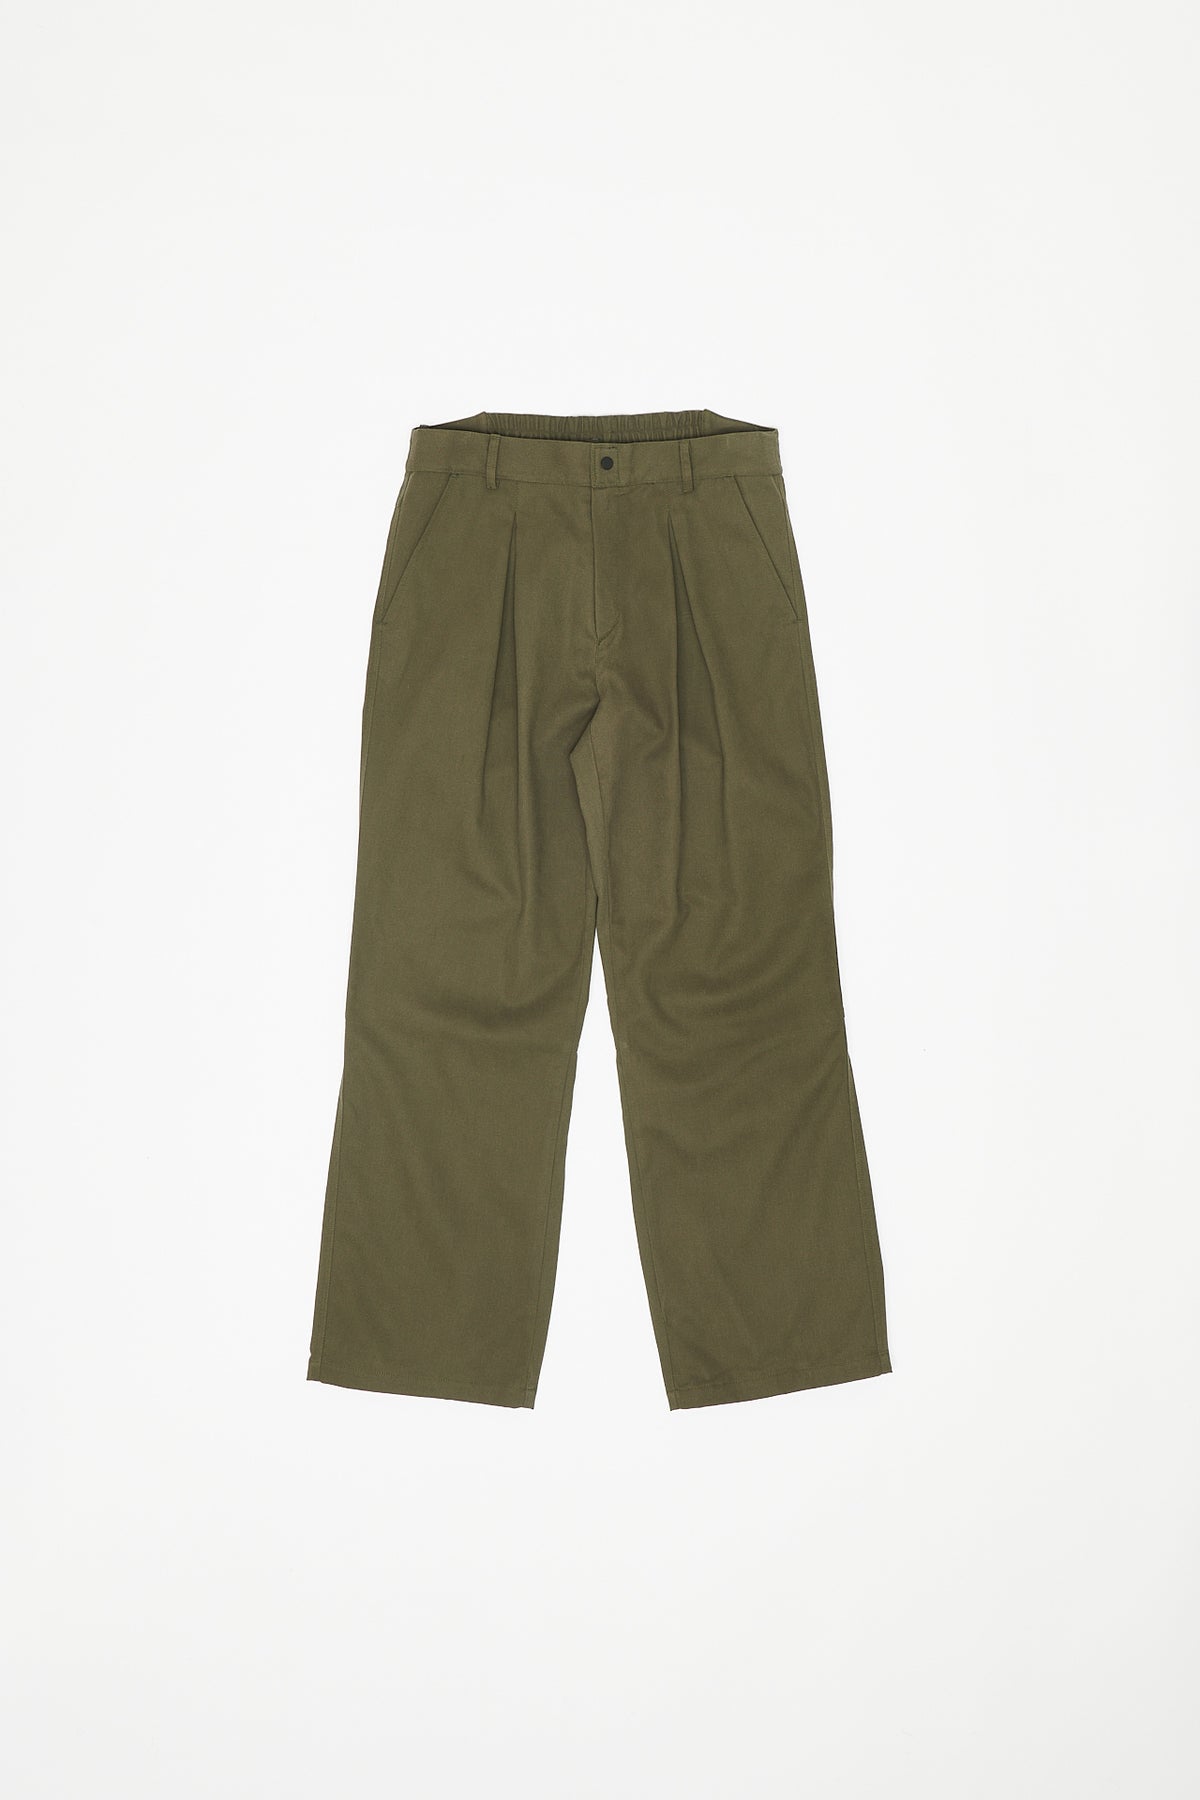 BOOT STORAGE PANTS - MILITARY GREEN